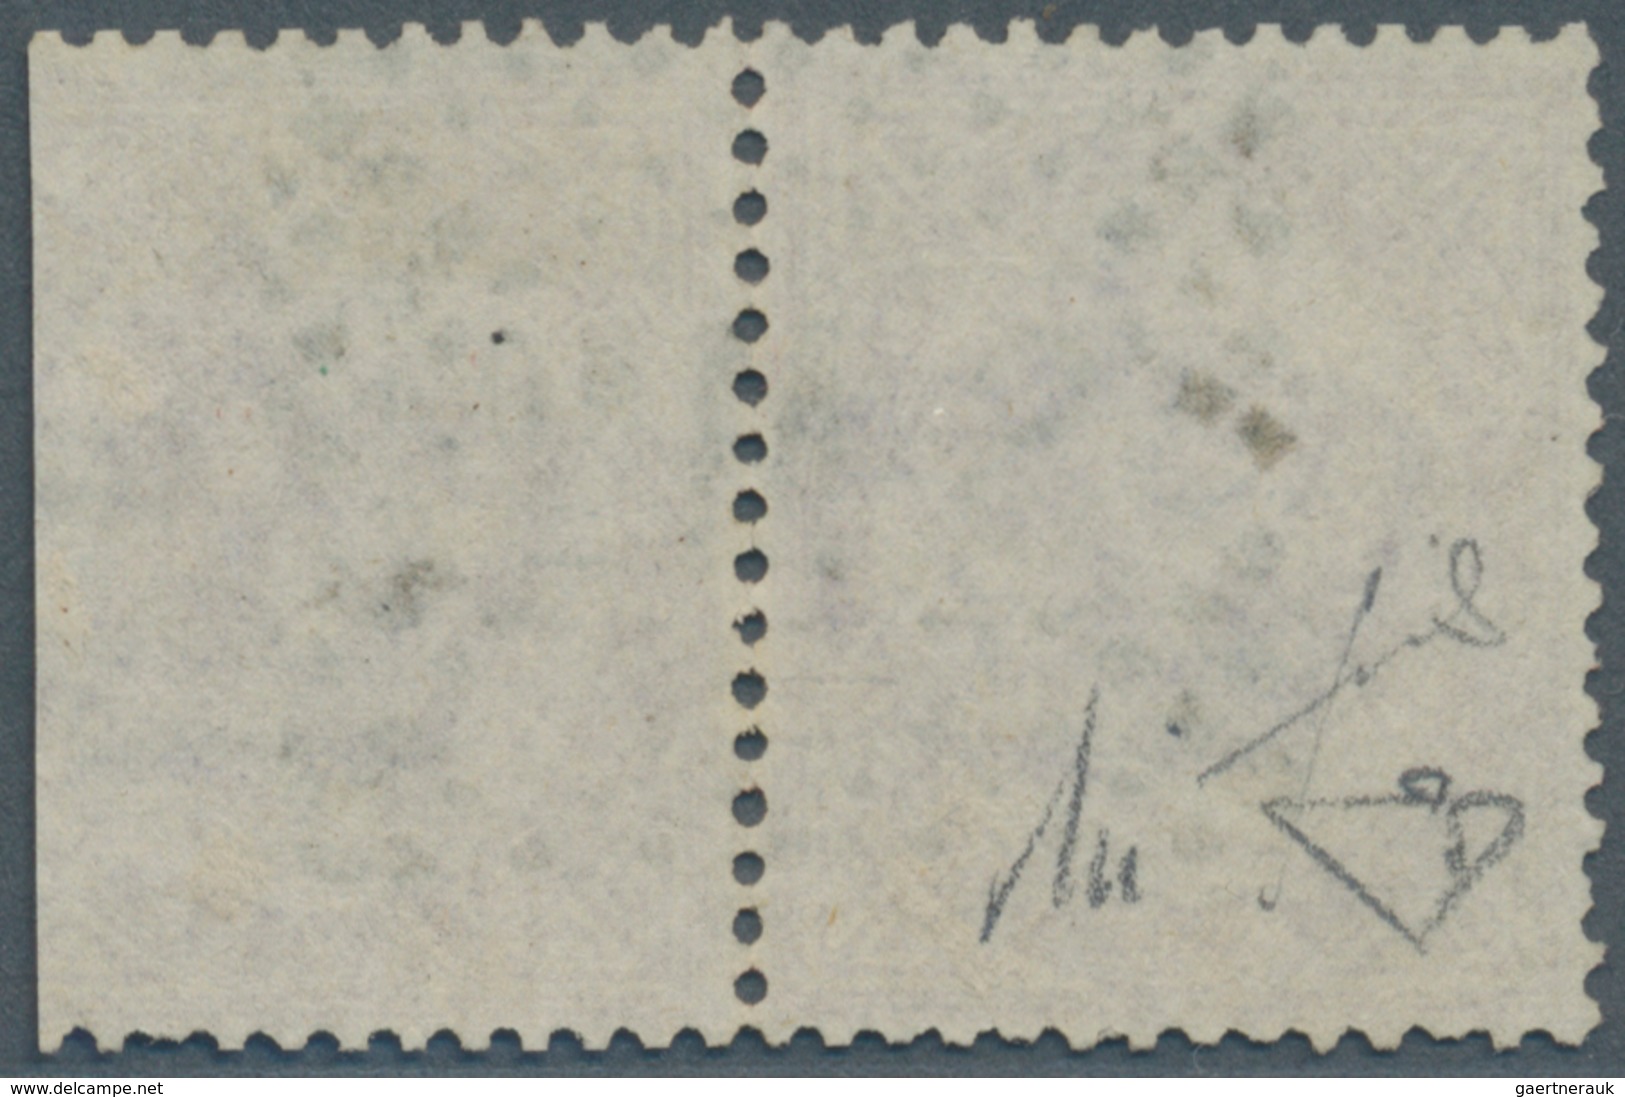 San Marino: FORERUNNER ITALY: 1863, 60 C Light Lila Horizontal Pair (cut/faults) Cancelled With Clea - Ungebraucht